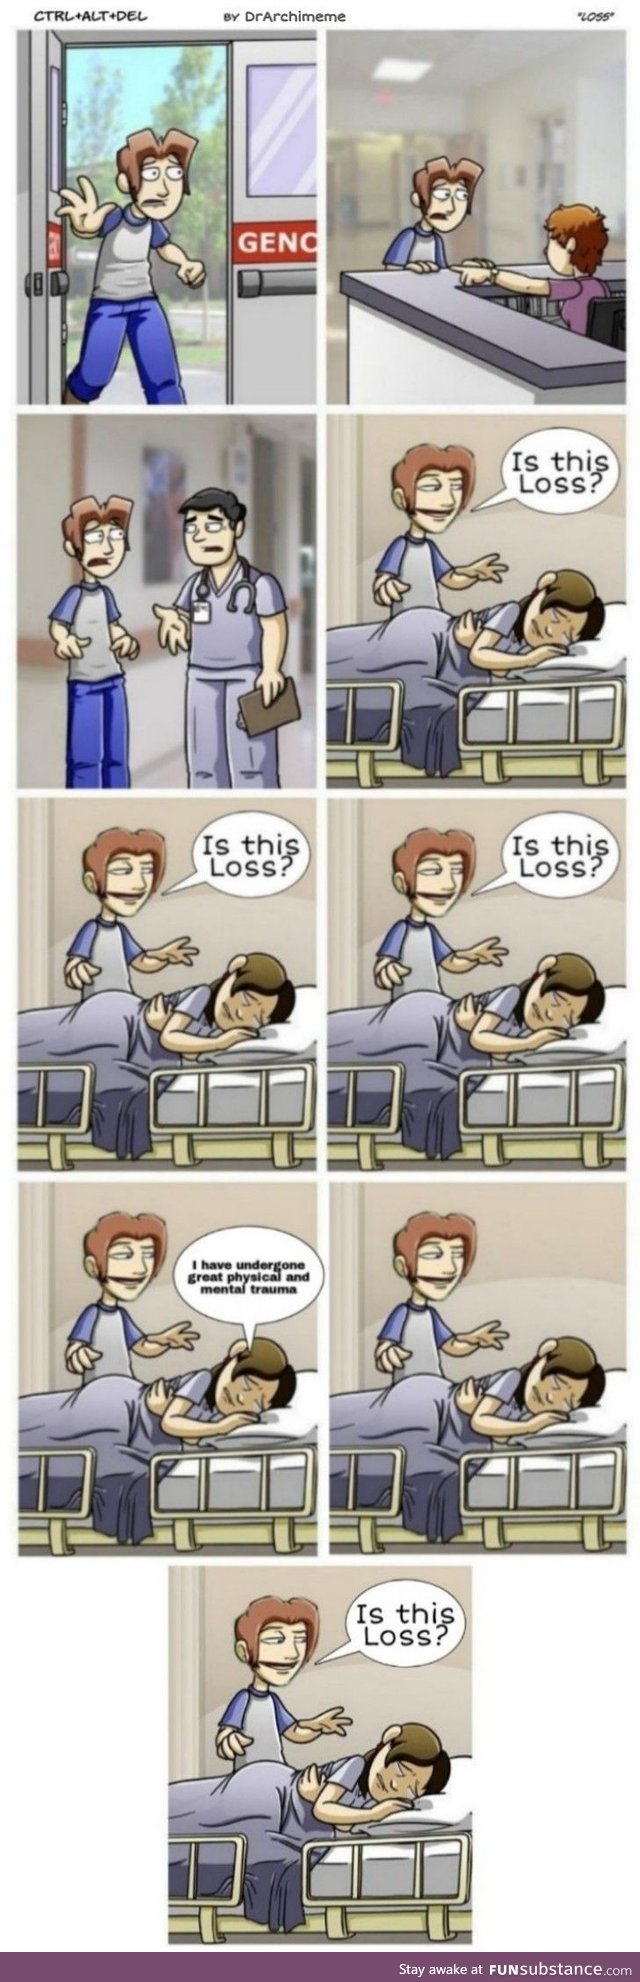 From Today's Meme Archives: "Loss" (est. 2008). Requested by jrlol3